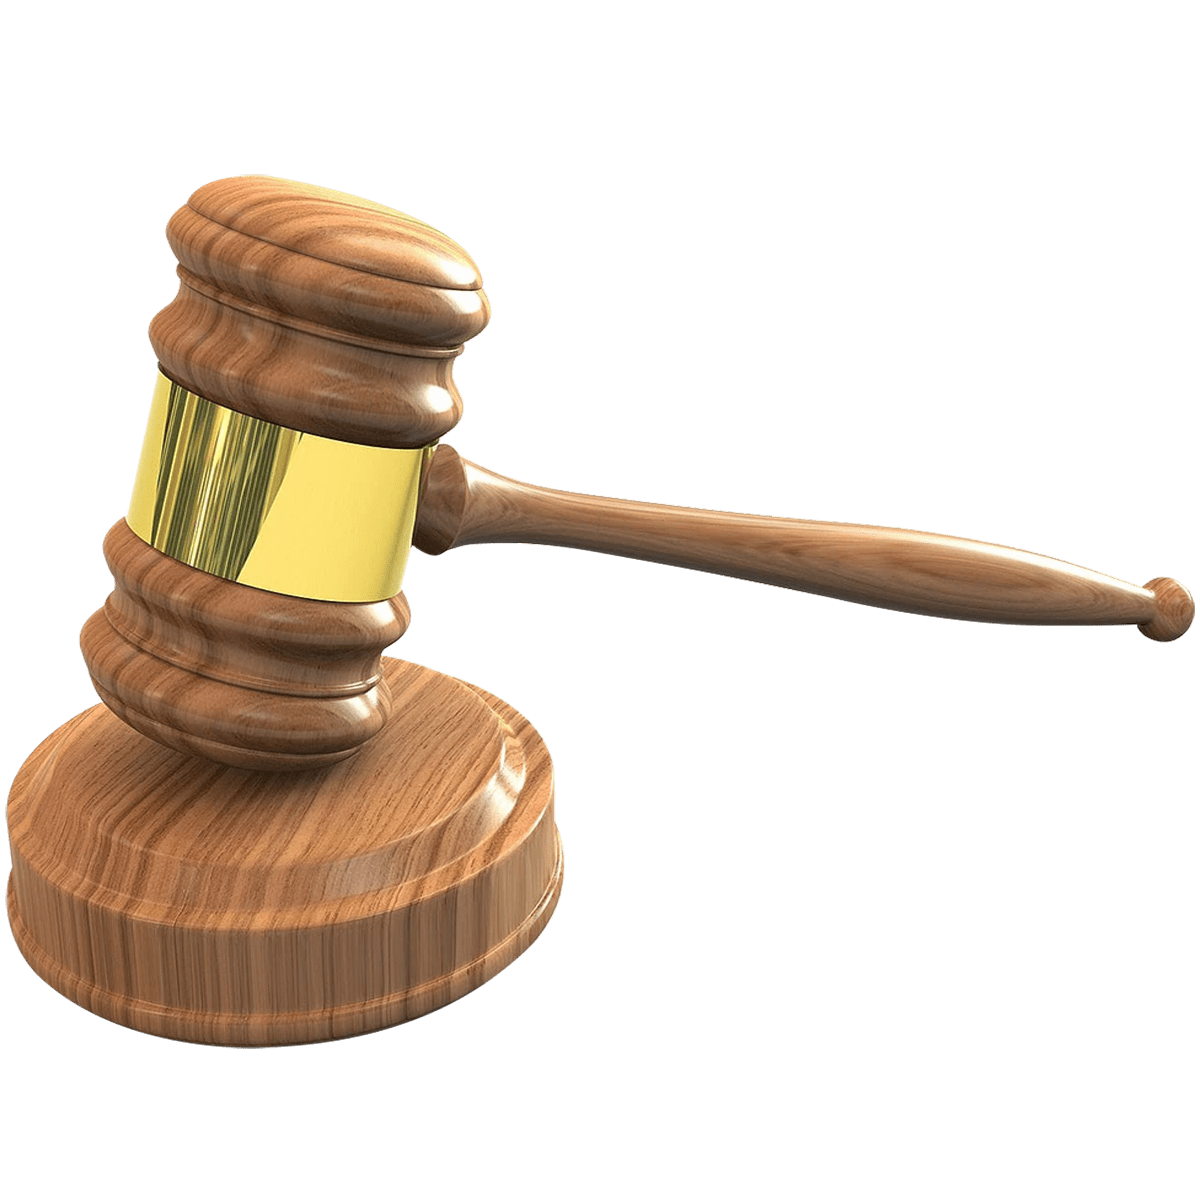 legal hammer png free, legal hammer png transparent, legal hammer png, judge hammer png, law png, gavel png, background remover, remove bg, book png, judge hammer png, law png, background remover, remove bg, book png,